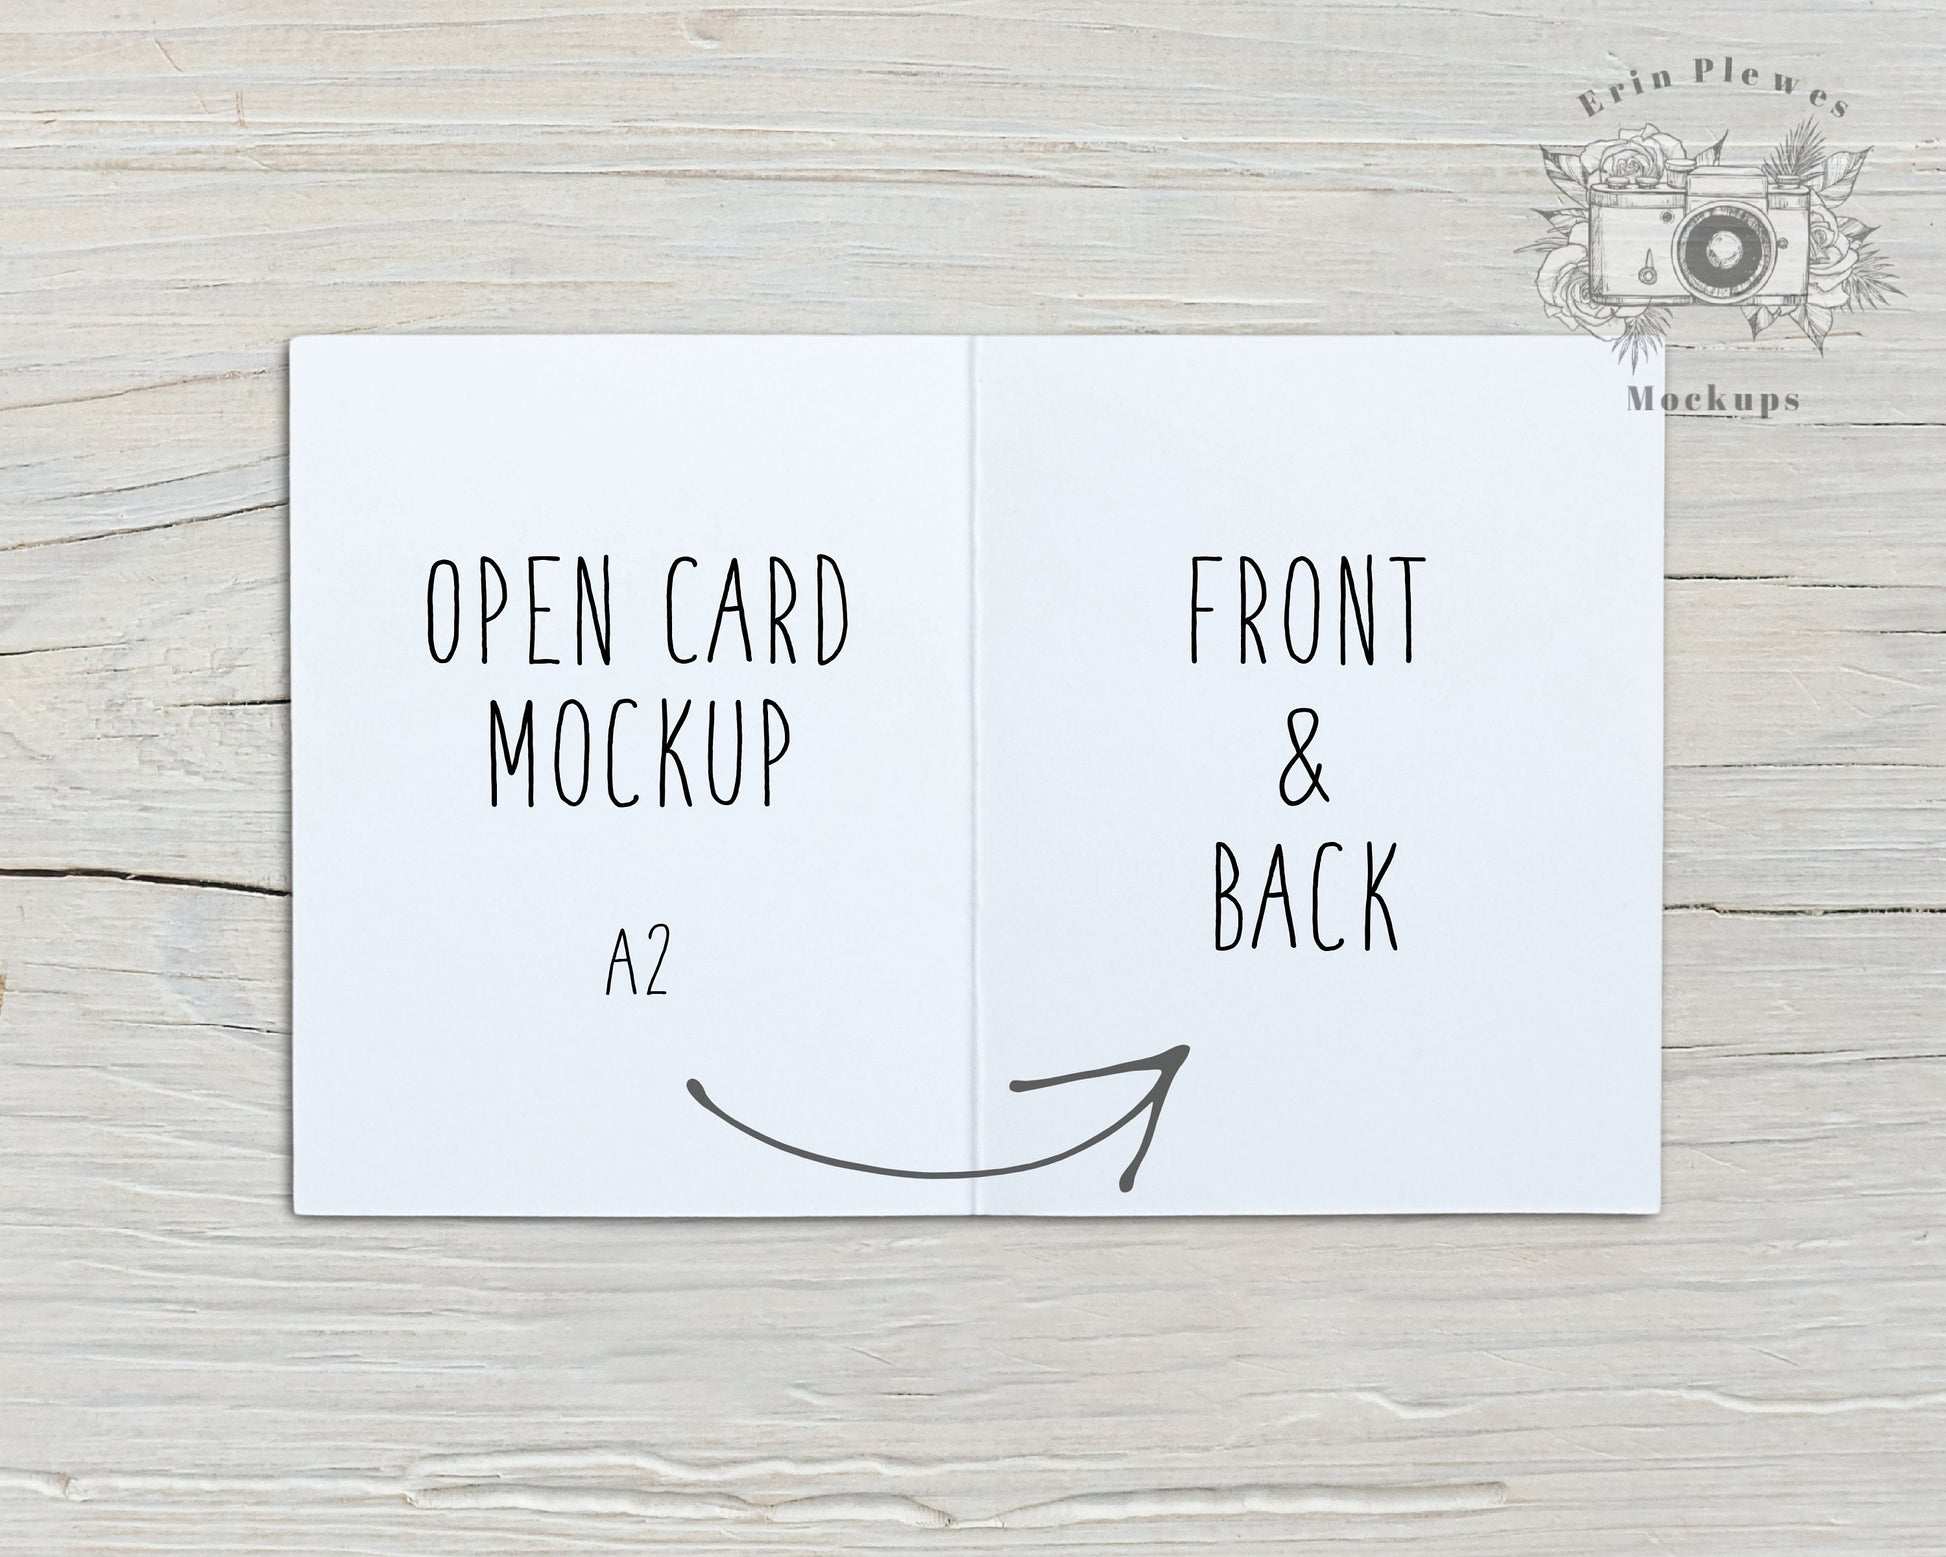 Open Card Mockup A2, Front and Back Greeting Card Mock-up for Rustic Wedding, Interior Card Stock Photo, Jpeg Instant Digital Download